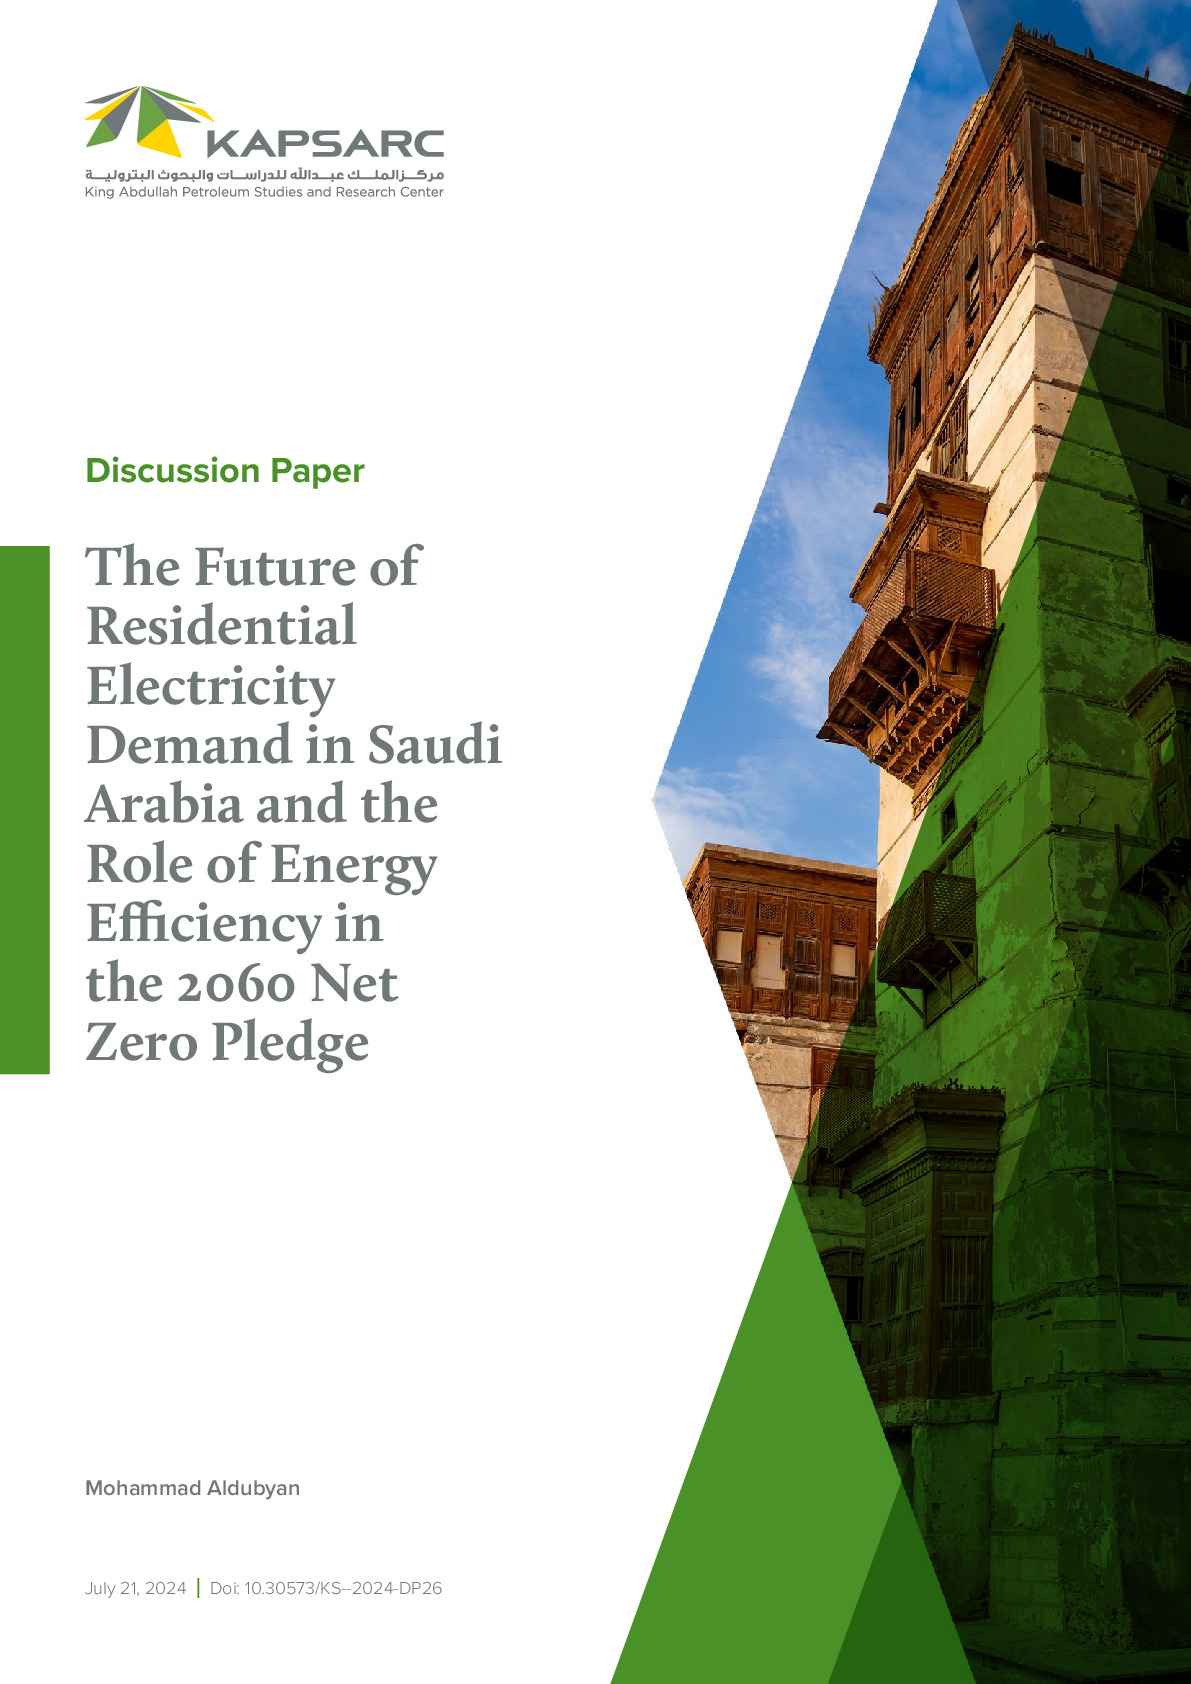 The Future of Residential Electricity Demand in Saudi Arabia and the Role of Energy Efficiency in the 2060 Net Zero Pledge